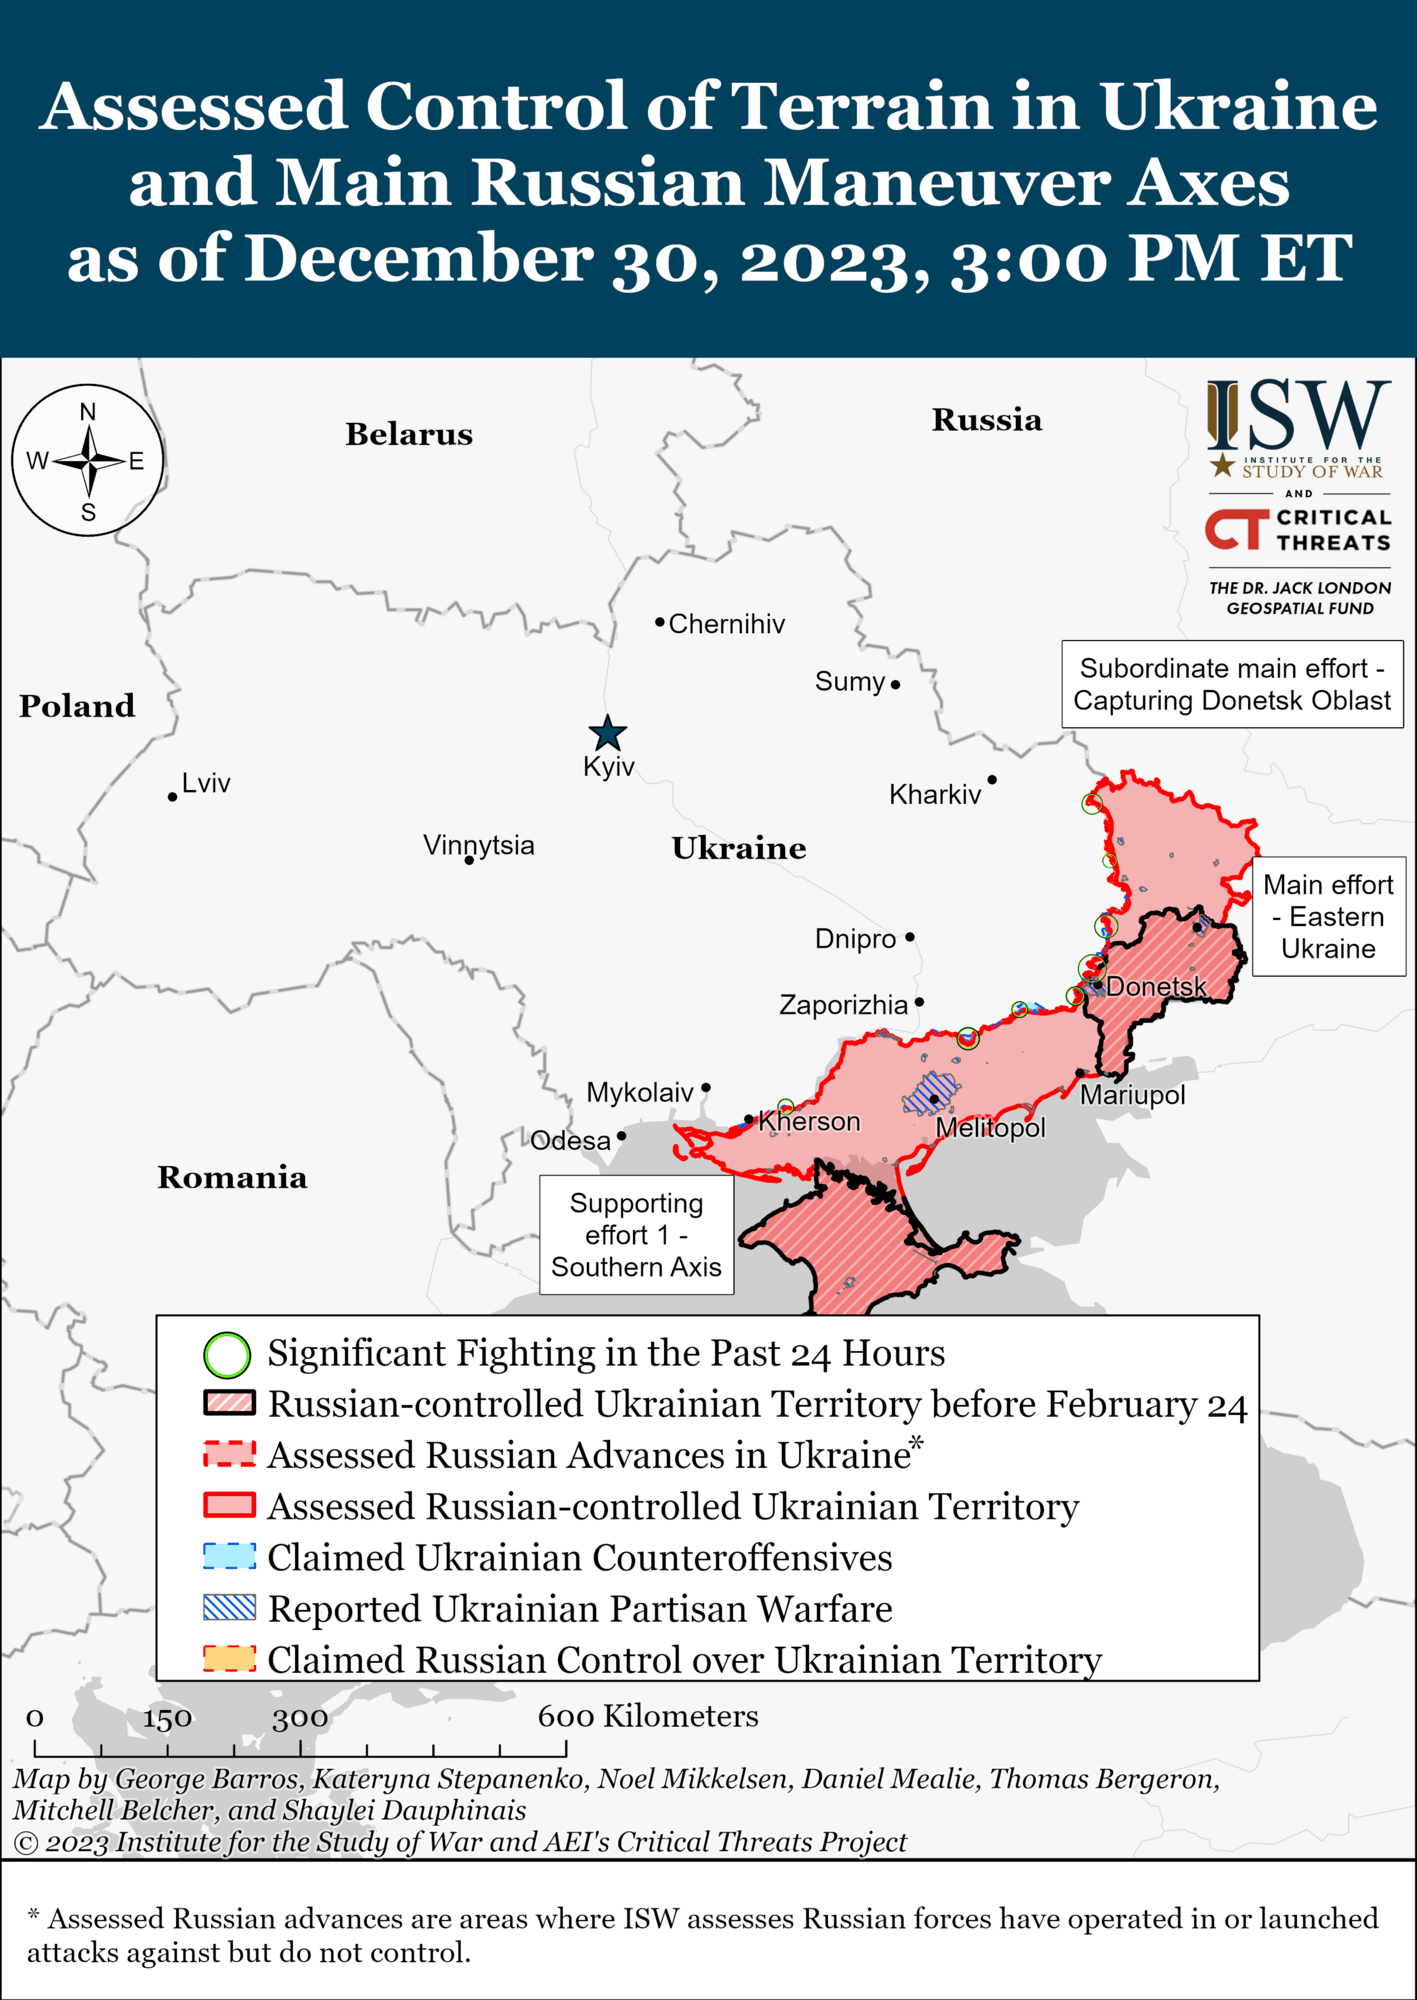 Kremlin continues to present the war as ''justified imperial conquest'': ISW explains its real goals